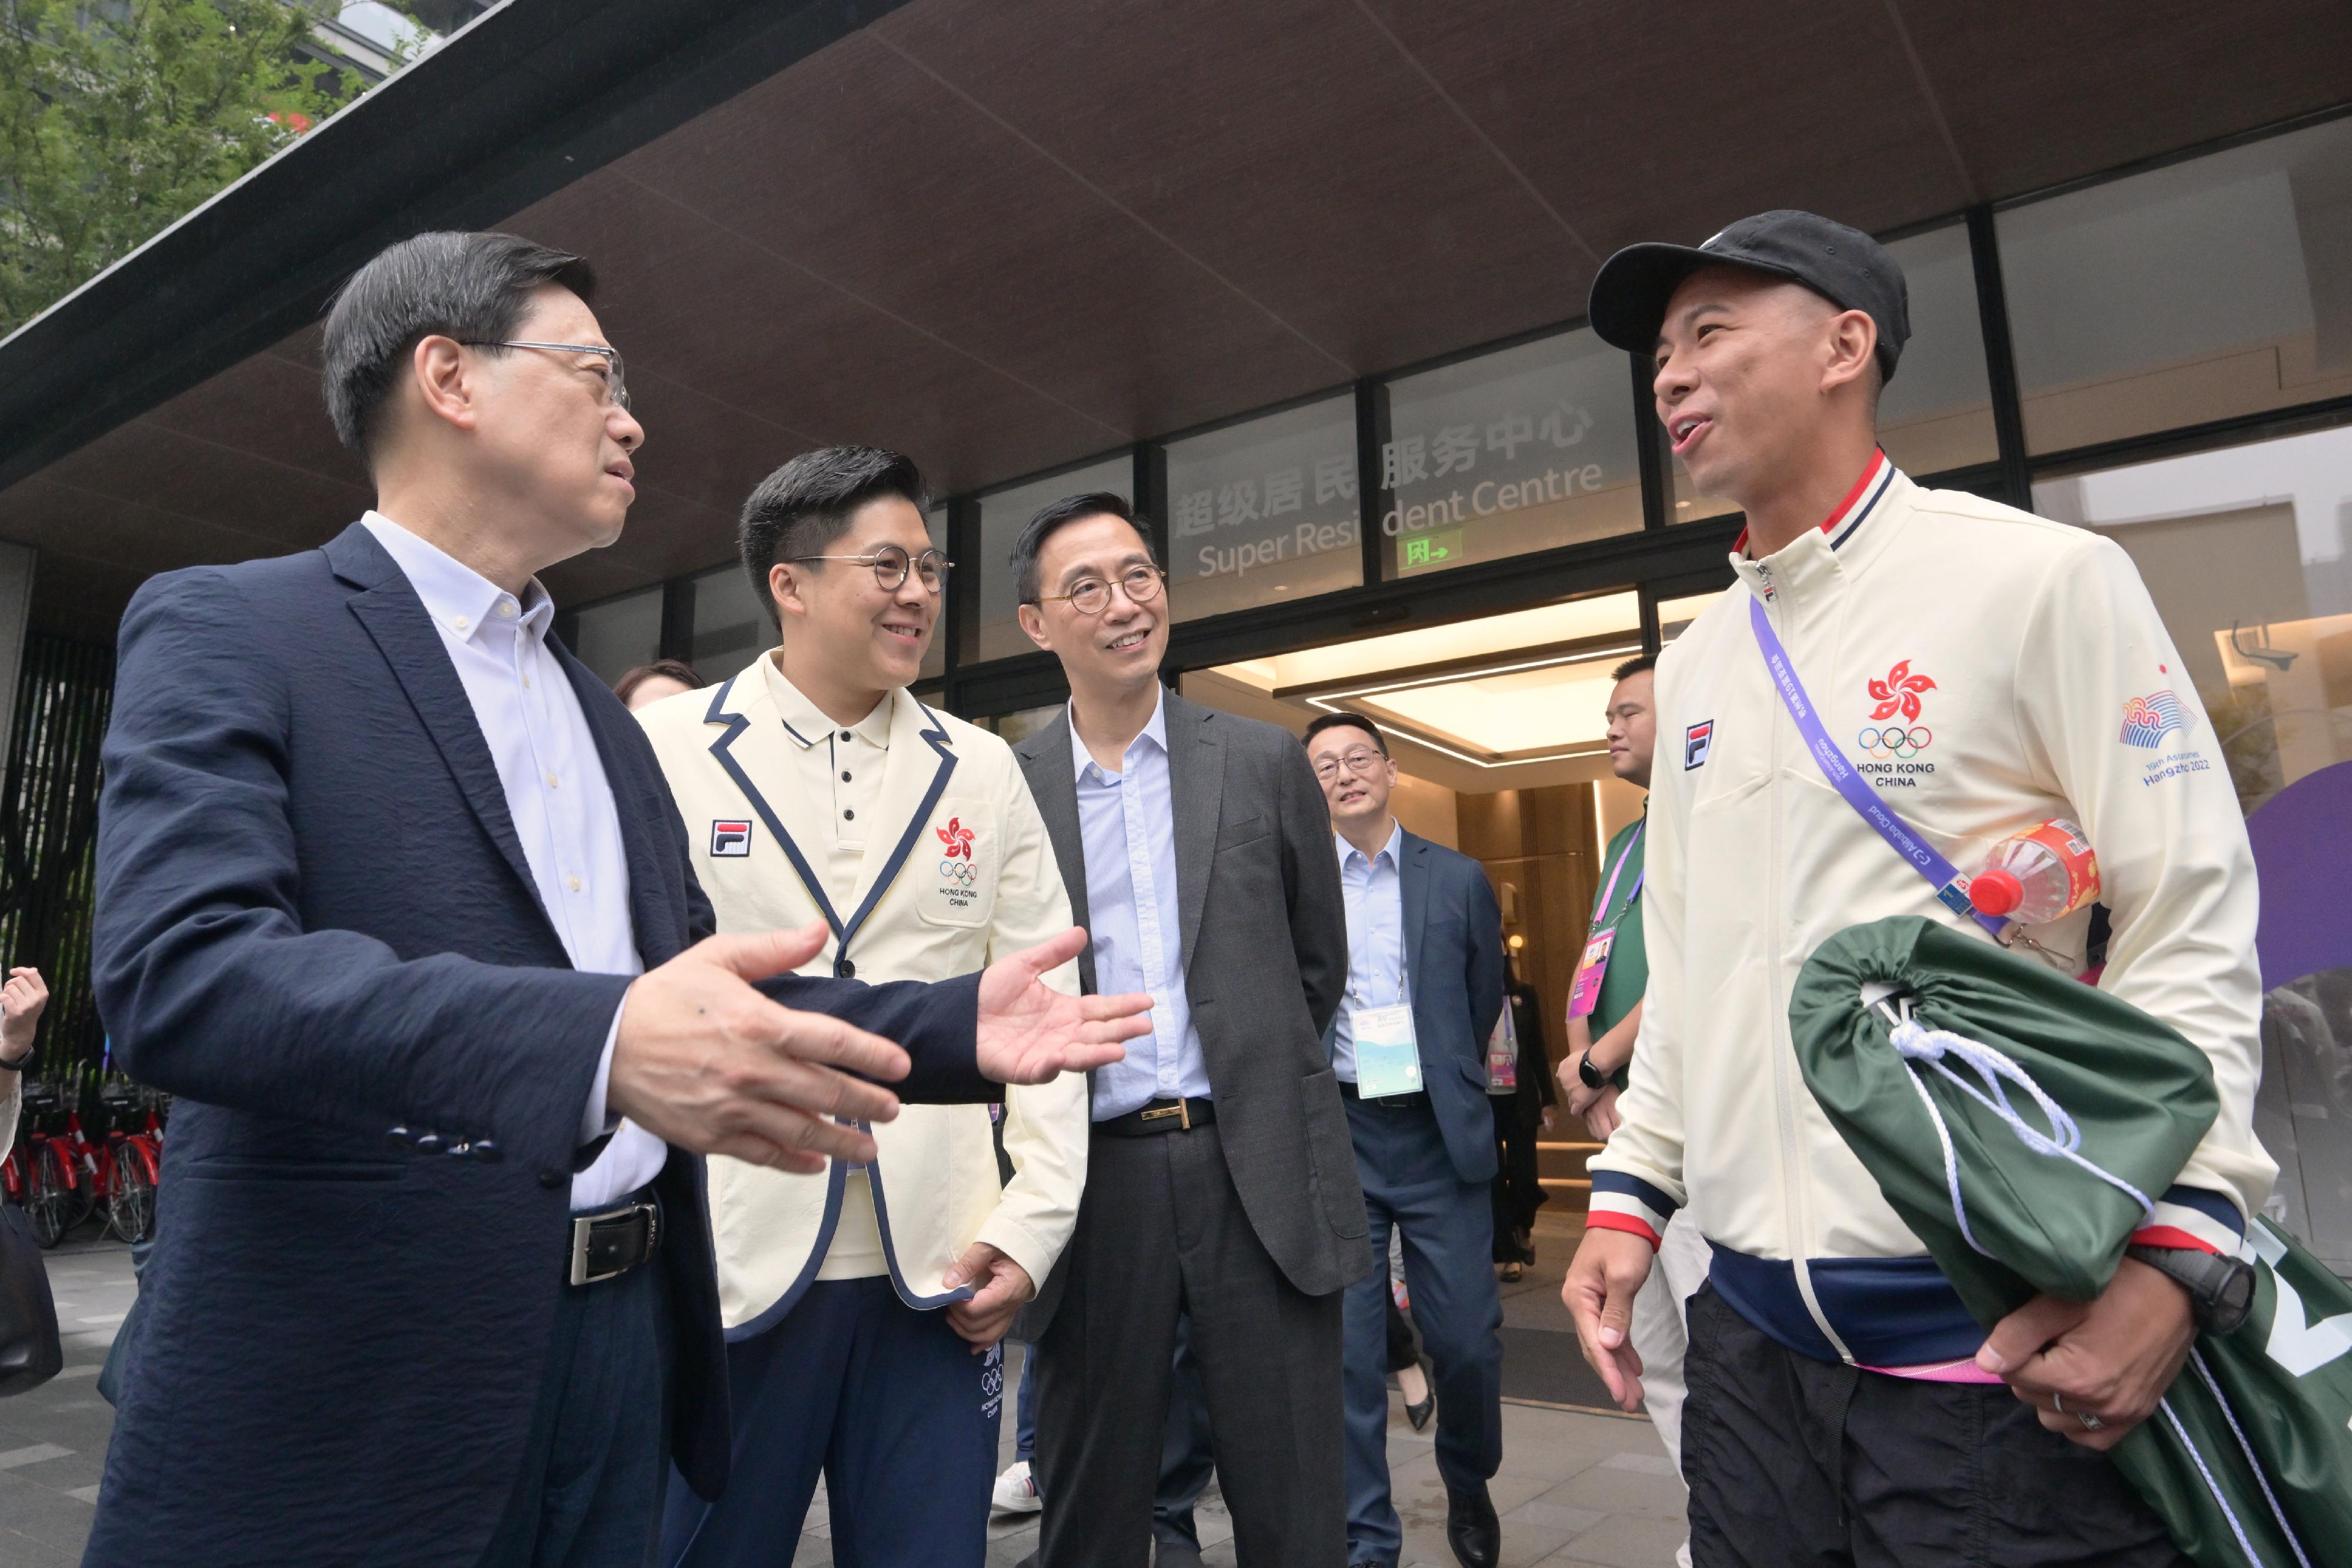 The Chief Executive, Mr John Lee, led a delegation of the Hong Kong Special Administrative Region Government to attend the opening ceremony of the 19th Asian Games Hangzhou (Asian Games) today (September 22). Photo shows (from left) Mr Lee; the Chef de Mission of the Hong Kong, China Delegation to the Asian Games, Mr Kenneth Fok; and the Secretary for Culture, Sports and Tourism, Mr Kevin Yeung, interacting with a Hong Kong athlete.